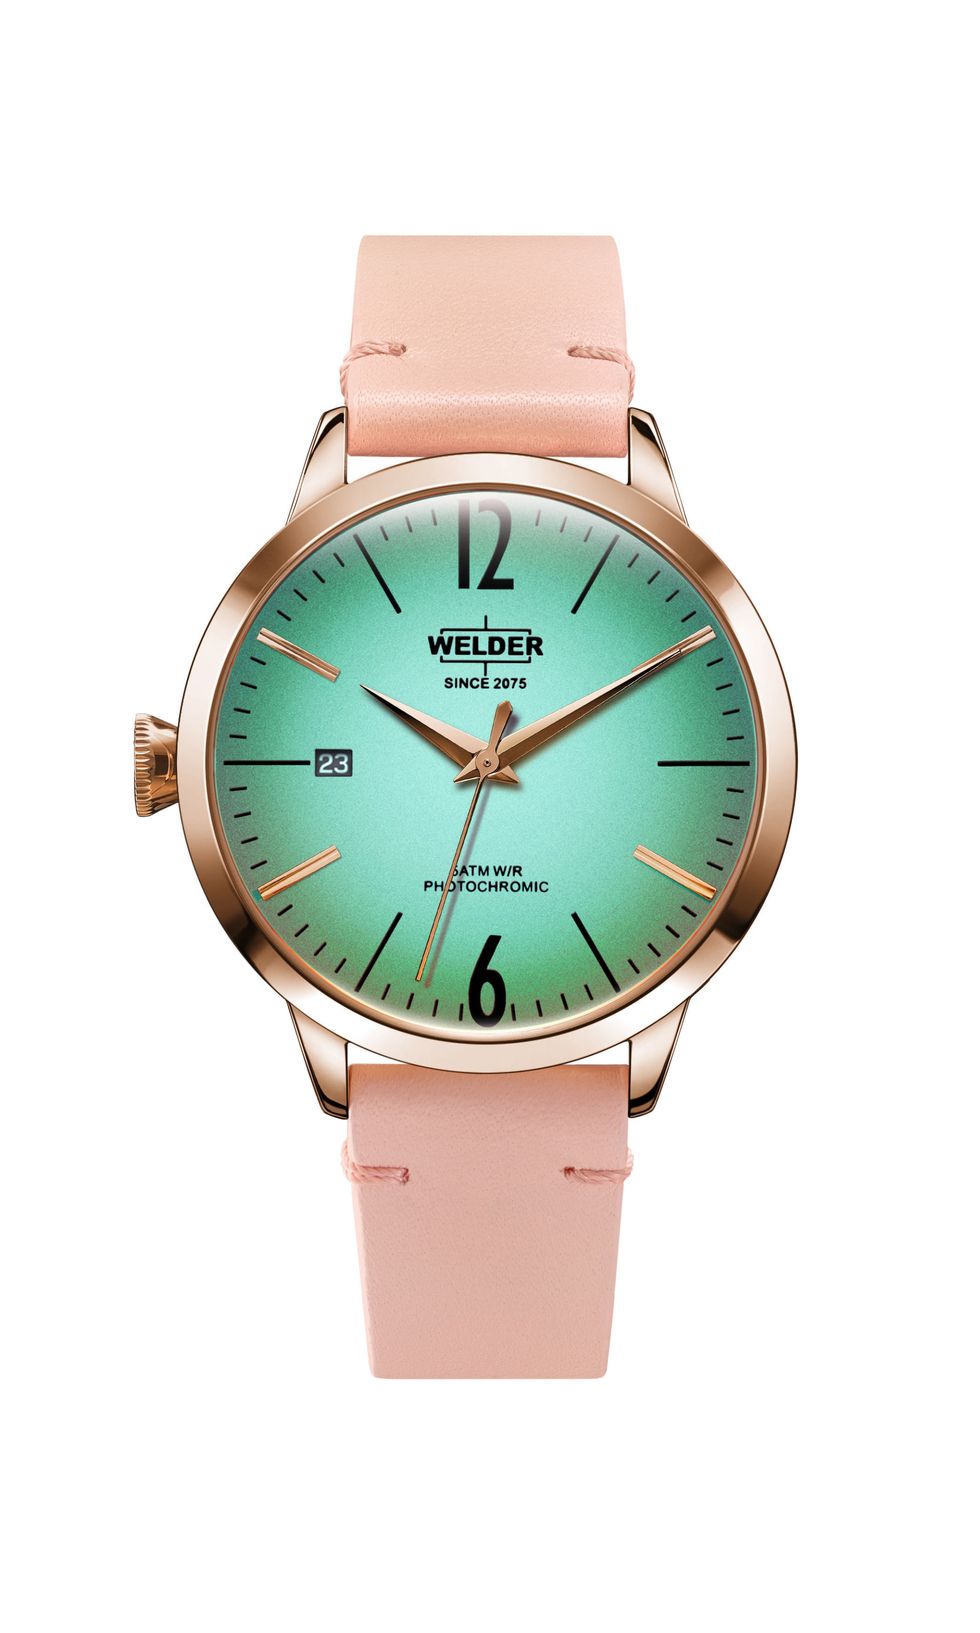 Product, Brown, Watch, Glass, Analog watch, Photograph, Teal, Aqua, Watch accessory, Font, 